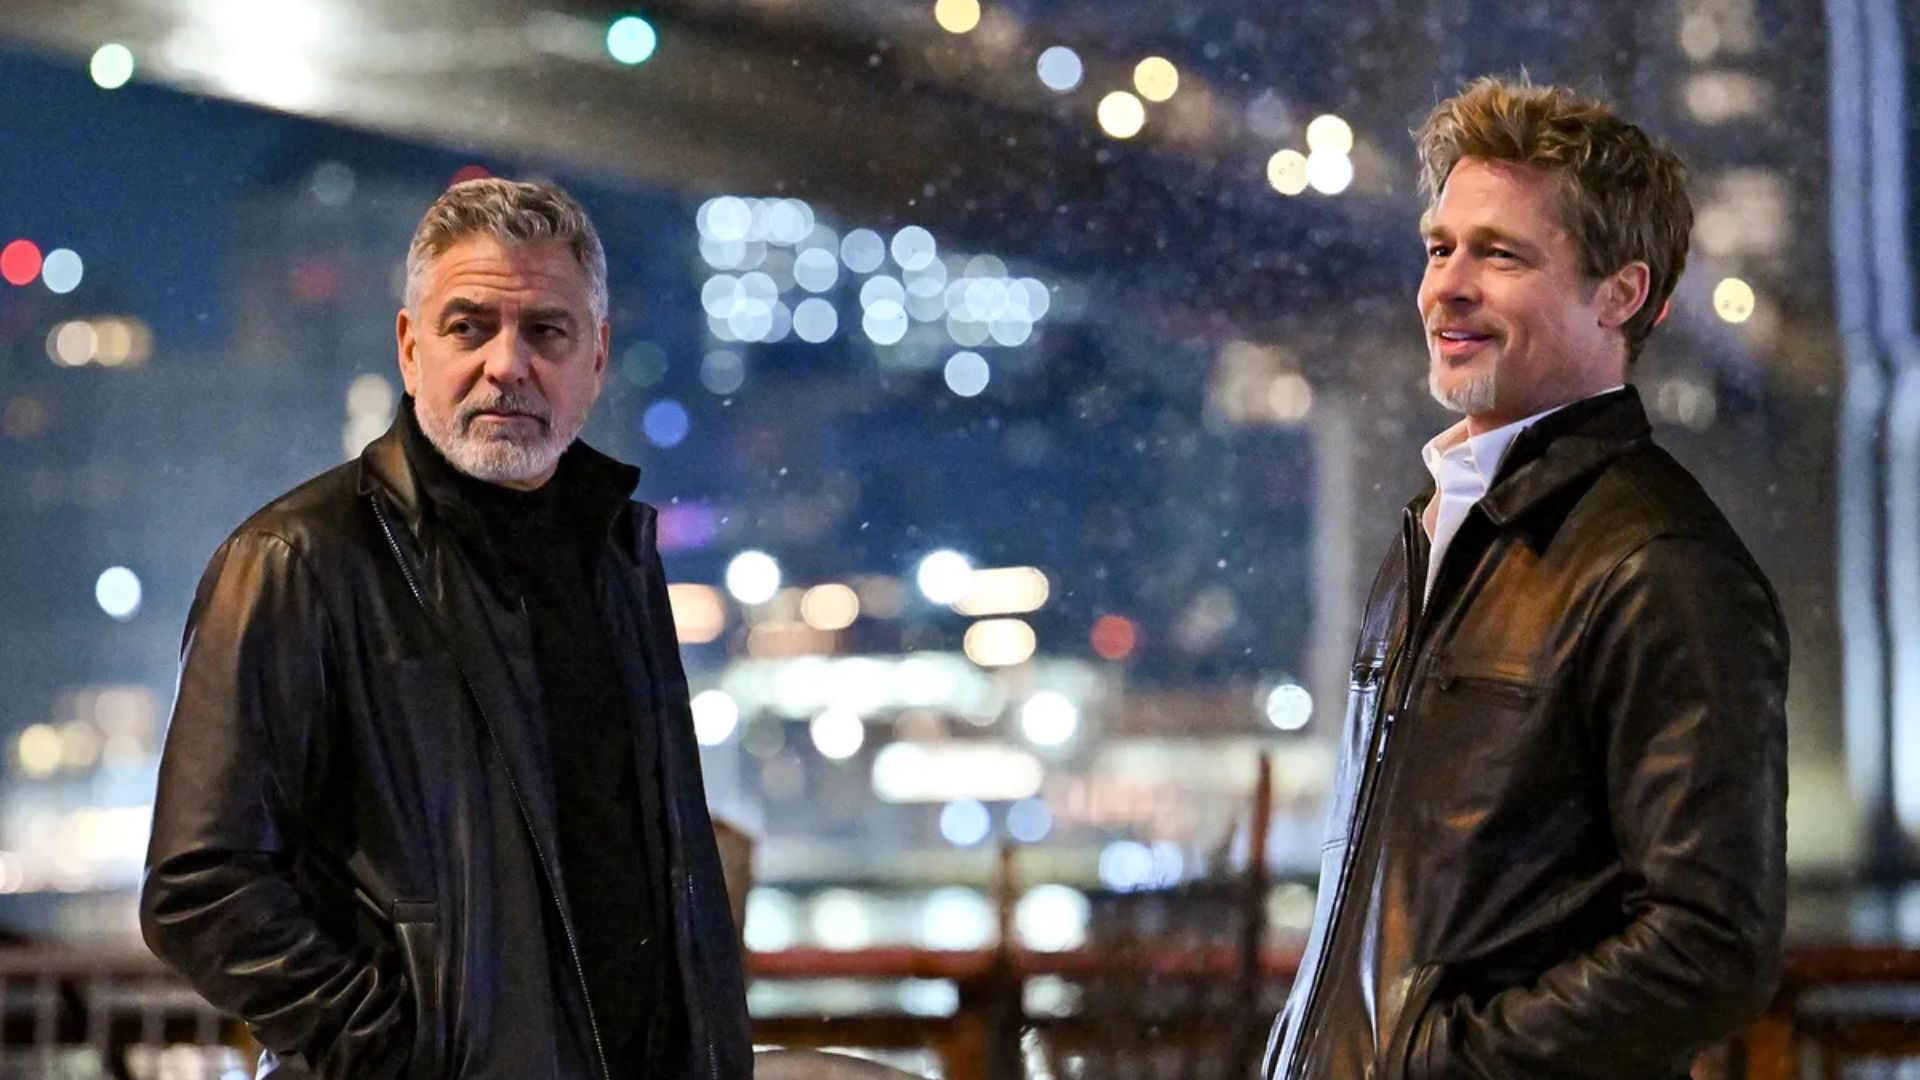 George Clooney and Brad Pitt Team Up Again in Exciting First Teaser for Action-Comedy 'Wolfs'